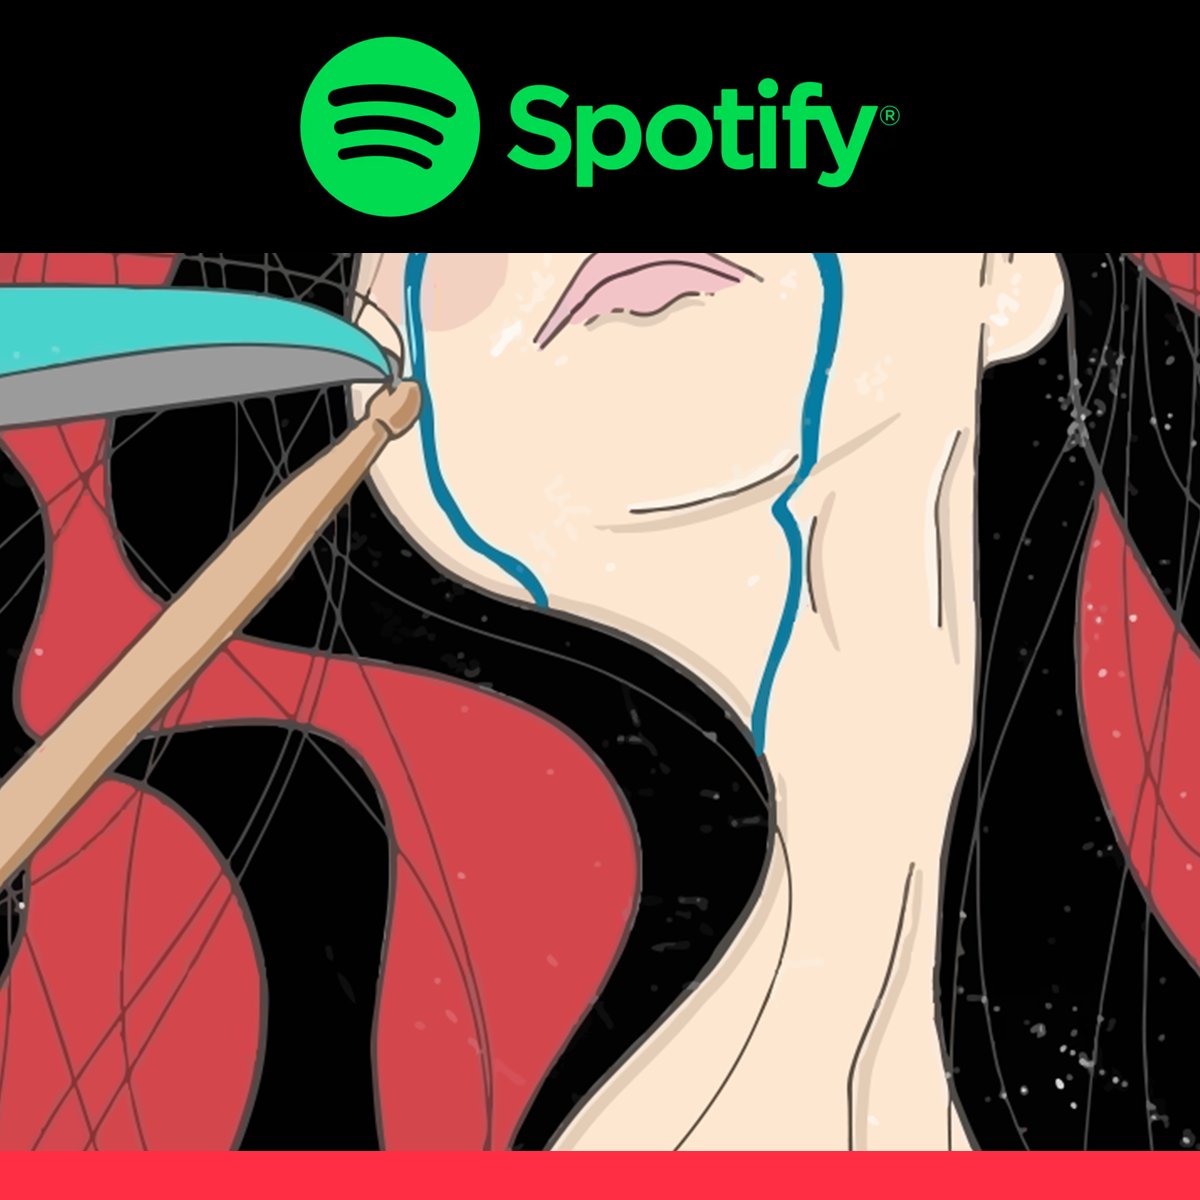 'I Am The White Stripes' has been added to more than 100 spotify playists. Add it to yours: linktr.ee/nihilists